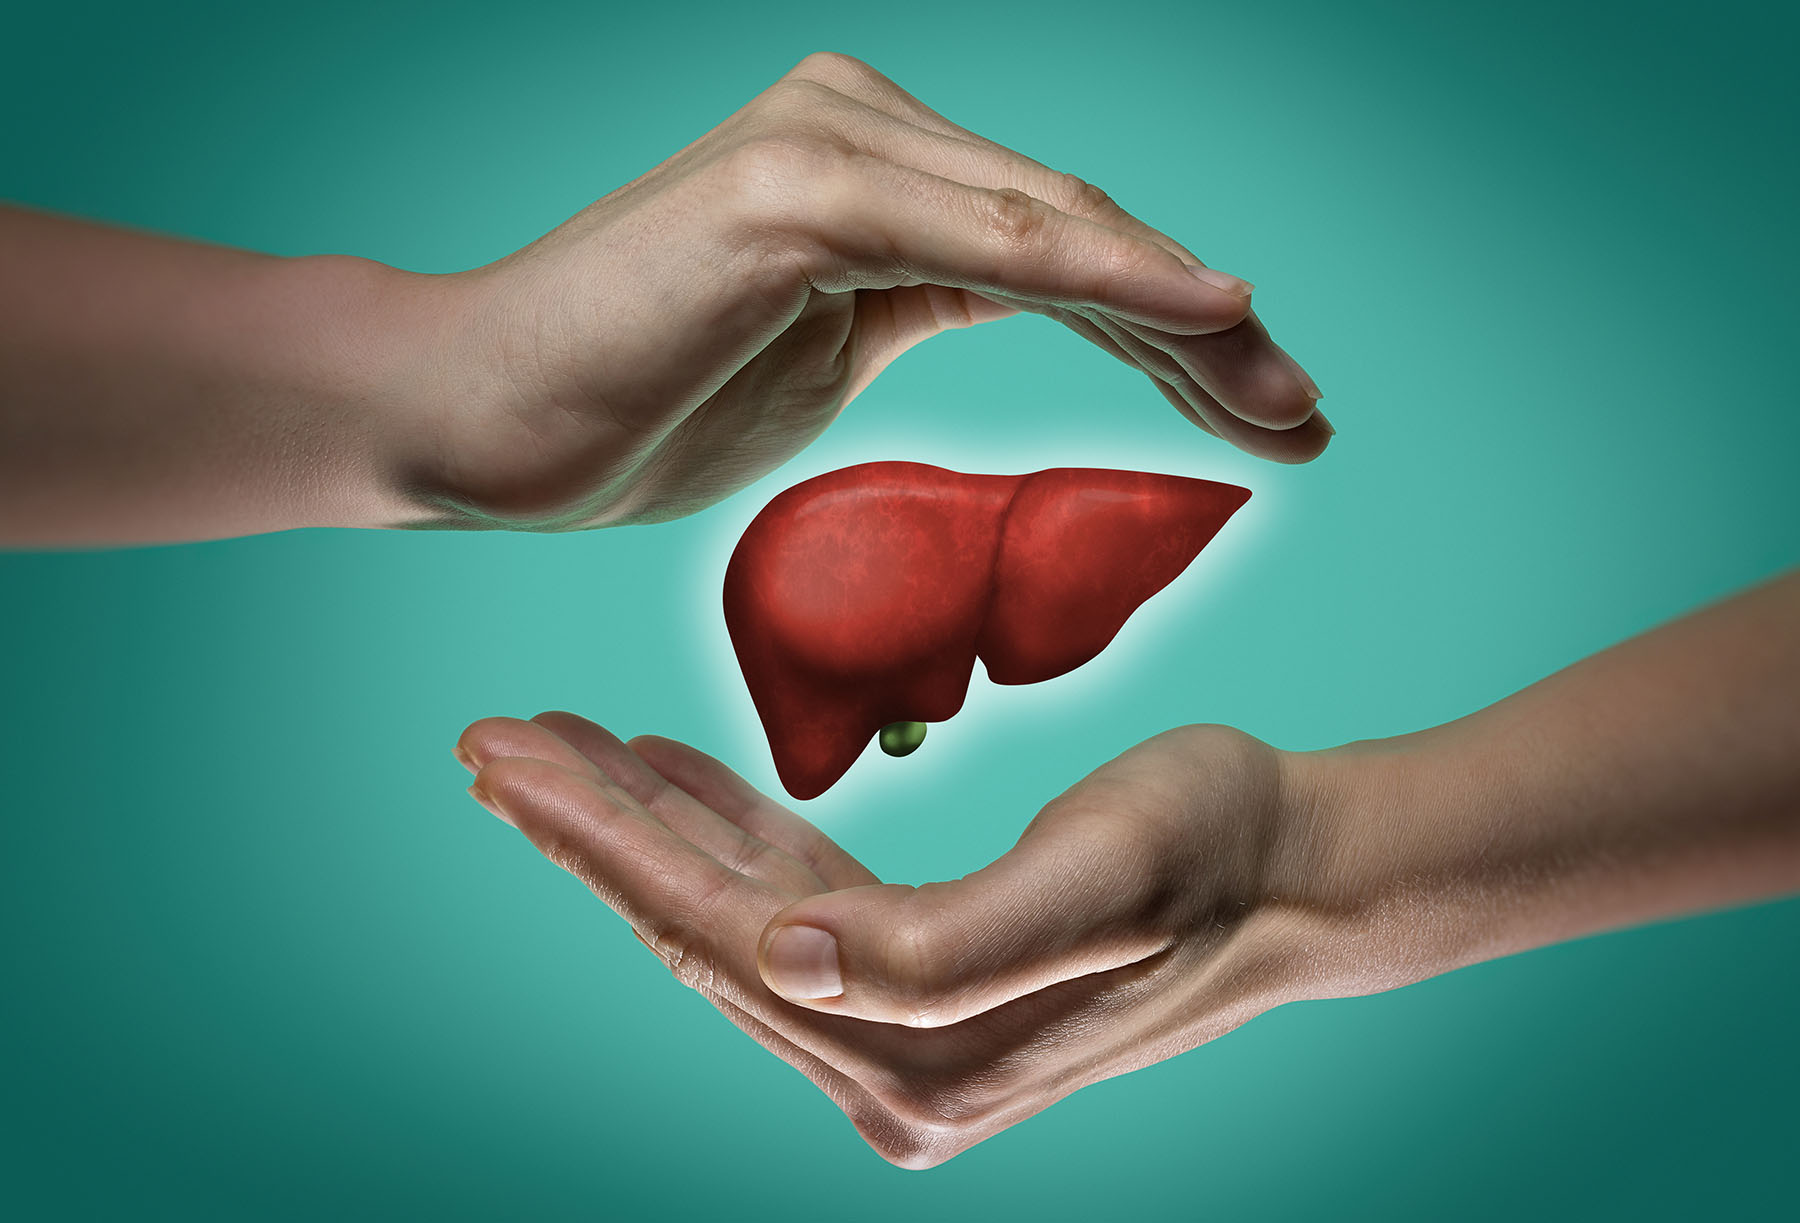 Image of hands forming a protective barrier around a healthy liver against a green background.